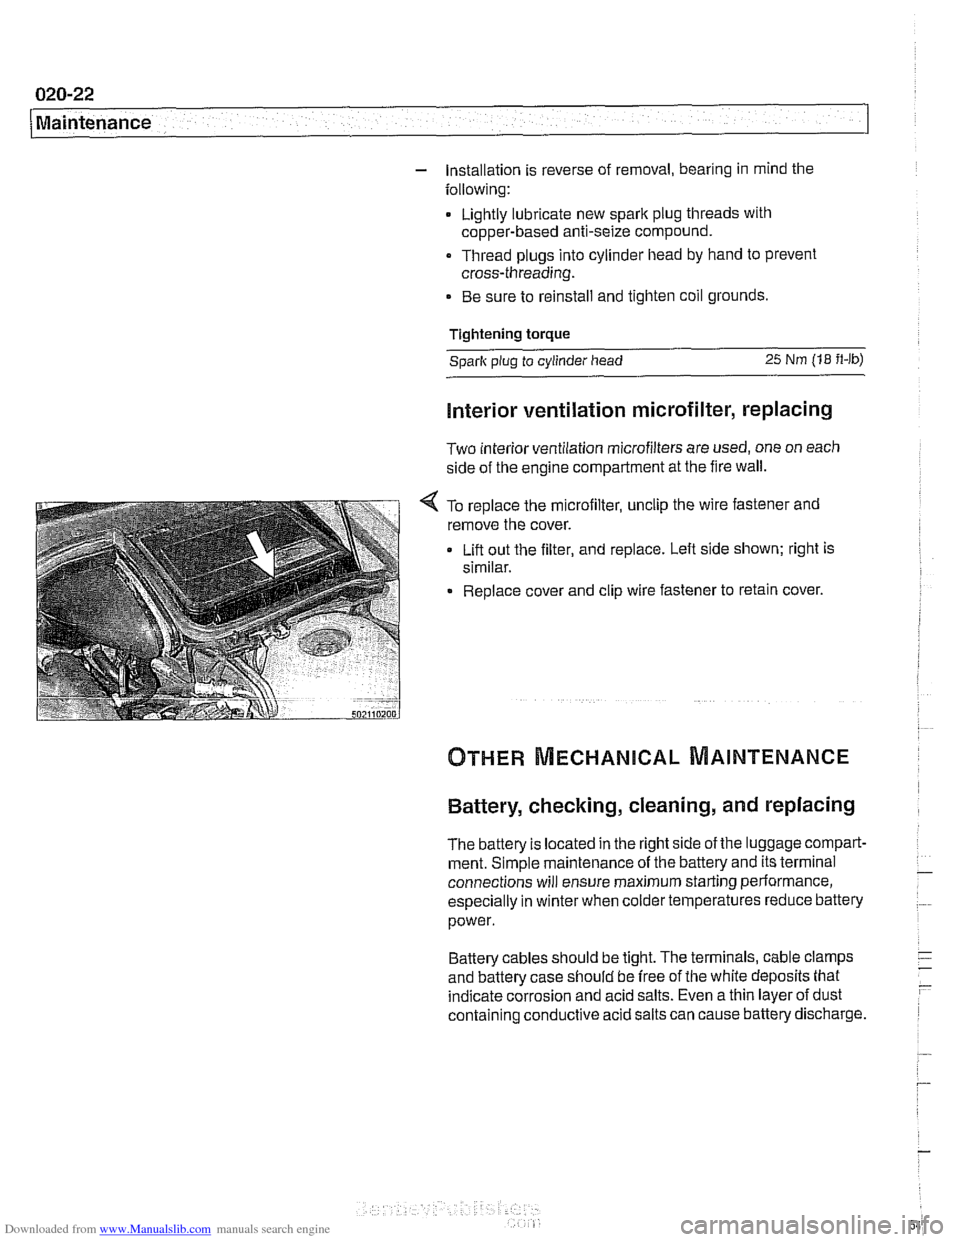 BMW 530i 1997 E39 Workshop Manual Downloaded from www.Manualslib.com manuals search engine 
020-22 Maintenance 
1 
- Installation is reverse  of removal,  bearing in mind  the 
following: 
Lightly lubricate  new 
spark plug  threads  